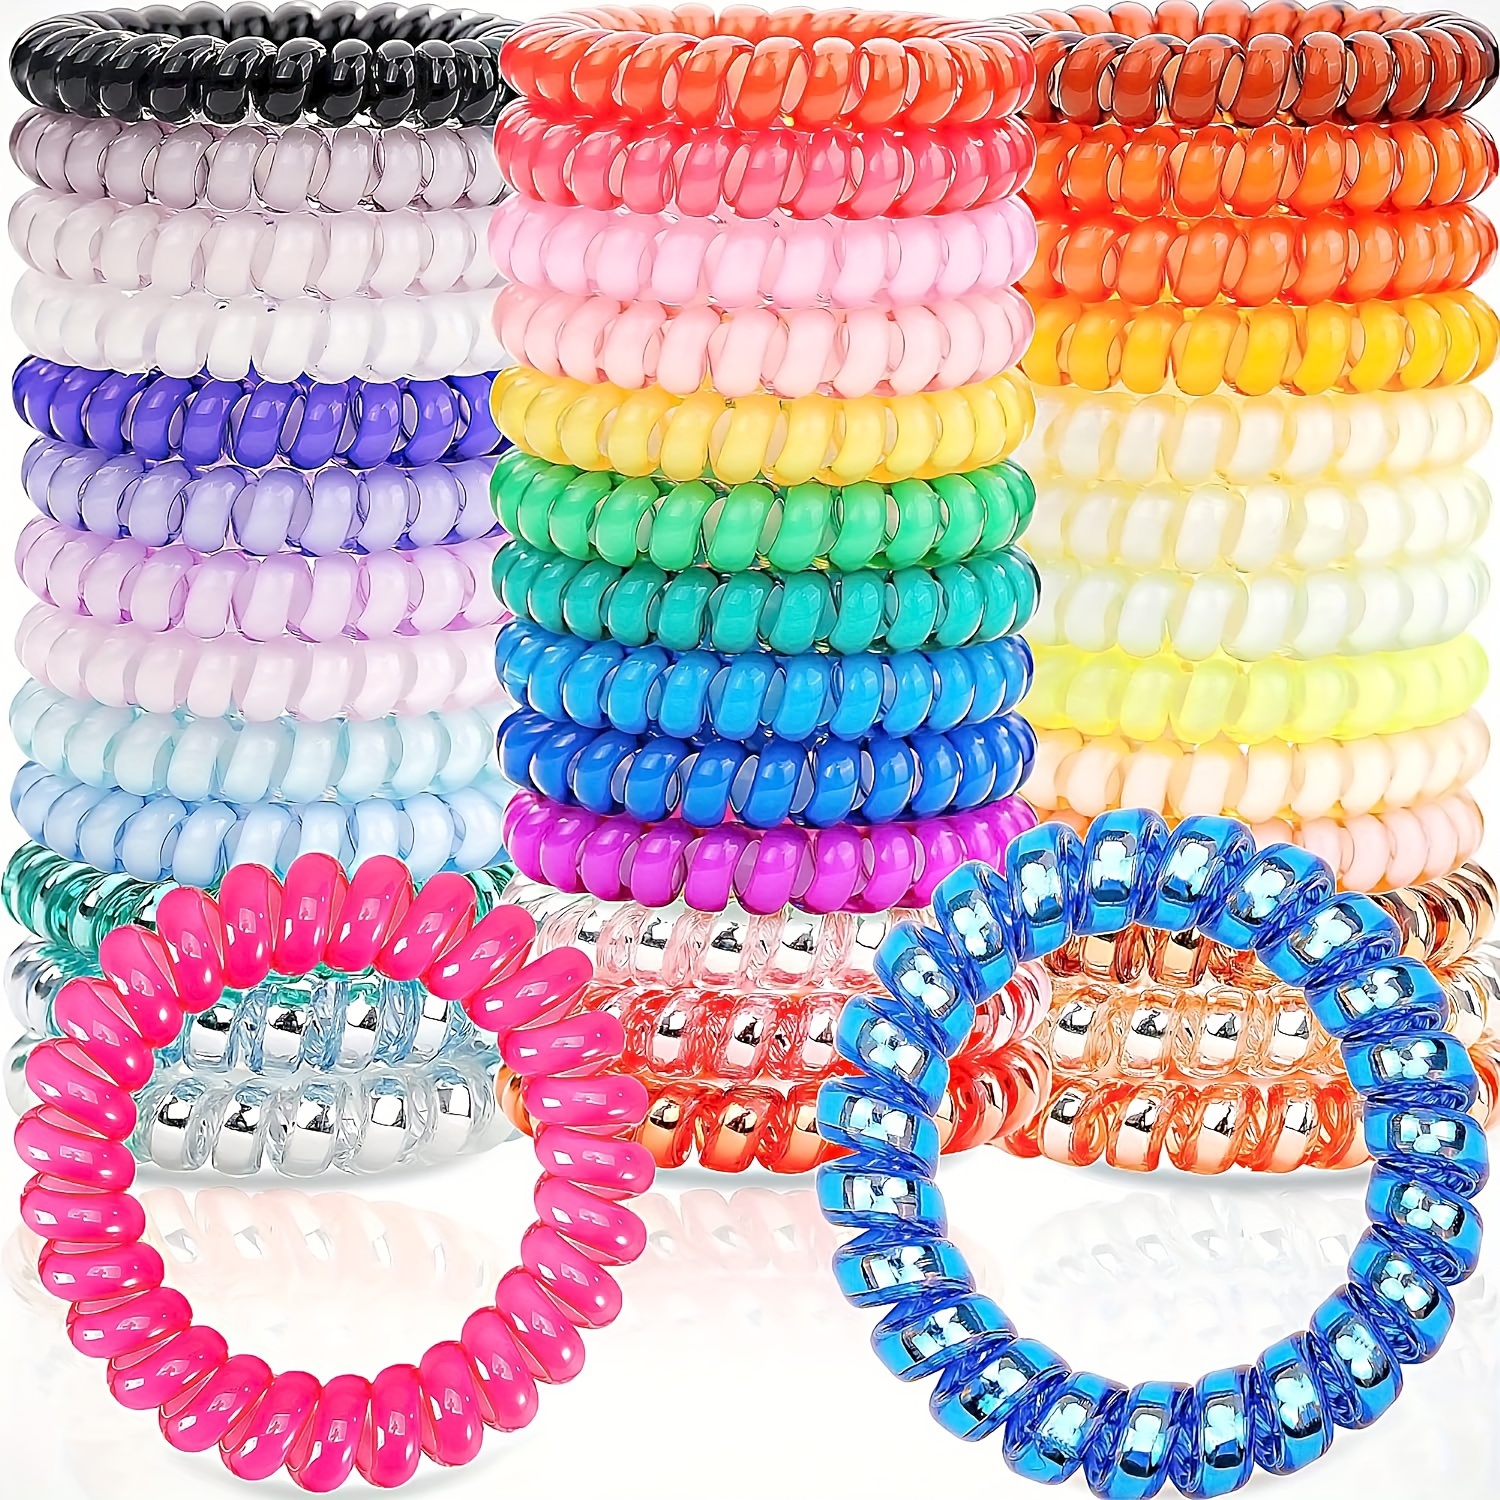 

30-piece Spiral Hair Ties - No Crease, Waterproof Coil Ponytail Holders For Women & Girls - Cute & Sweet Elastic Hair Accessories In Assorted Colors